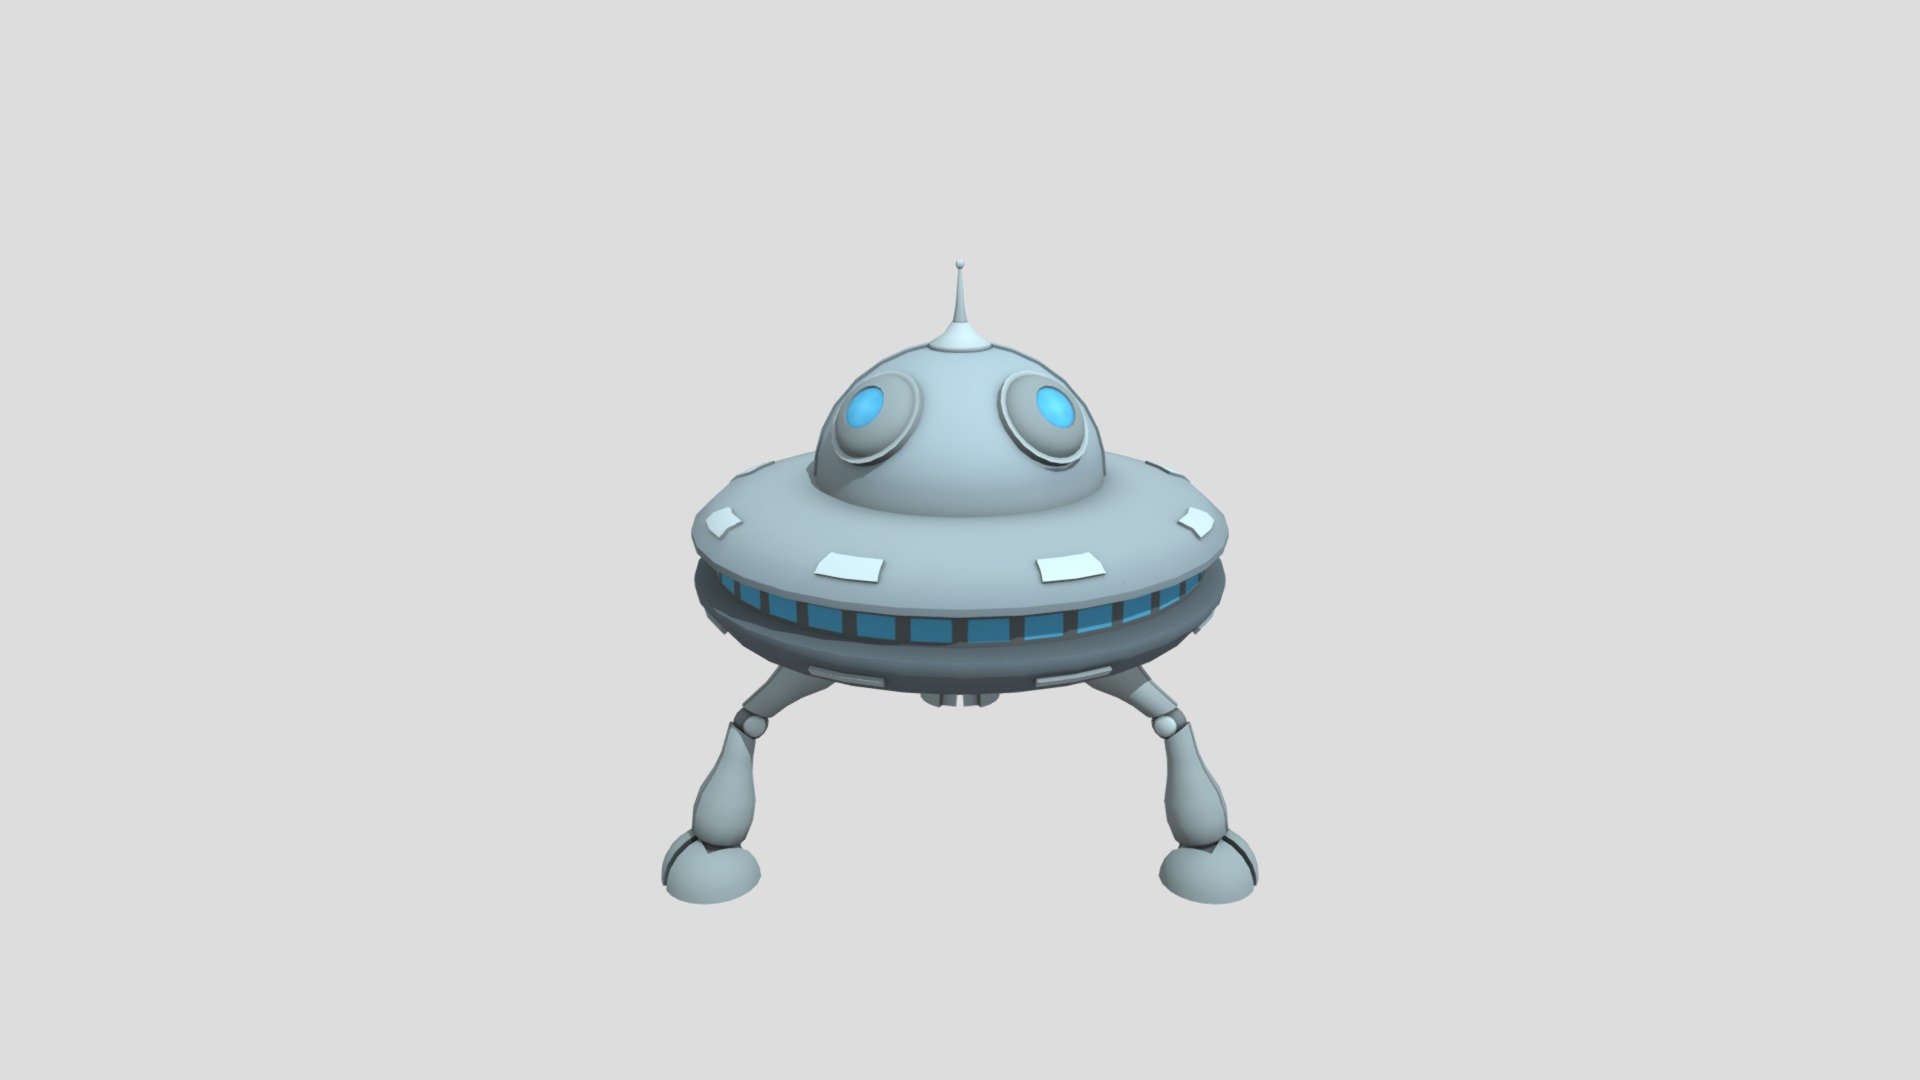 This UFO is from a GU Japan commercial called: Kyary Pamyu Invader Invader from 2013. The 3D model is made by adan, who had made the images from the commercial to a 3D model.

Link to Adan's Sketchfab page: https://sketchfab.com/Apdigivid 3d model